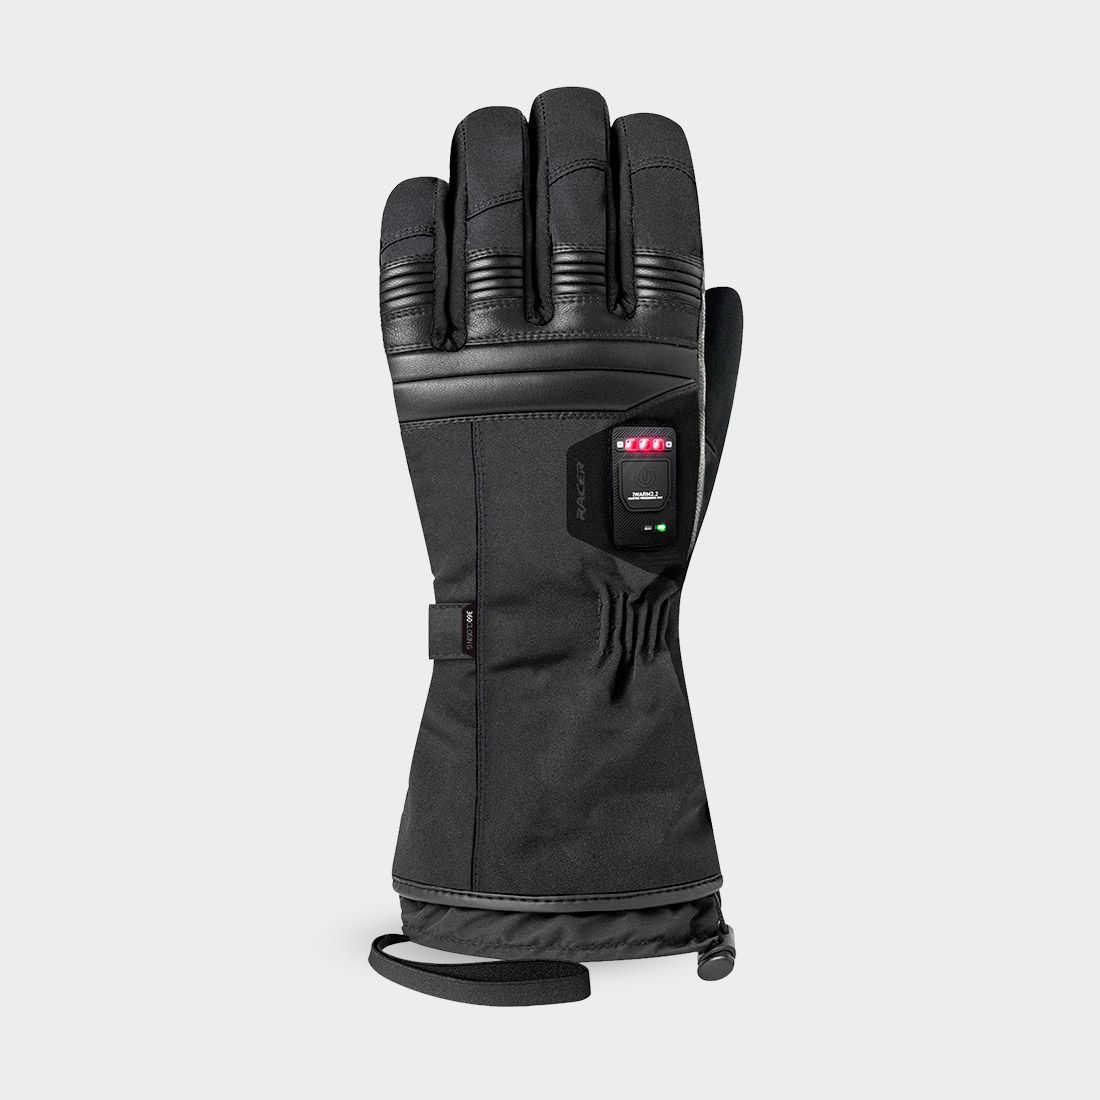 CONNECTIC 4 - Glove POLYMAX®